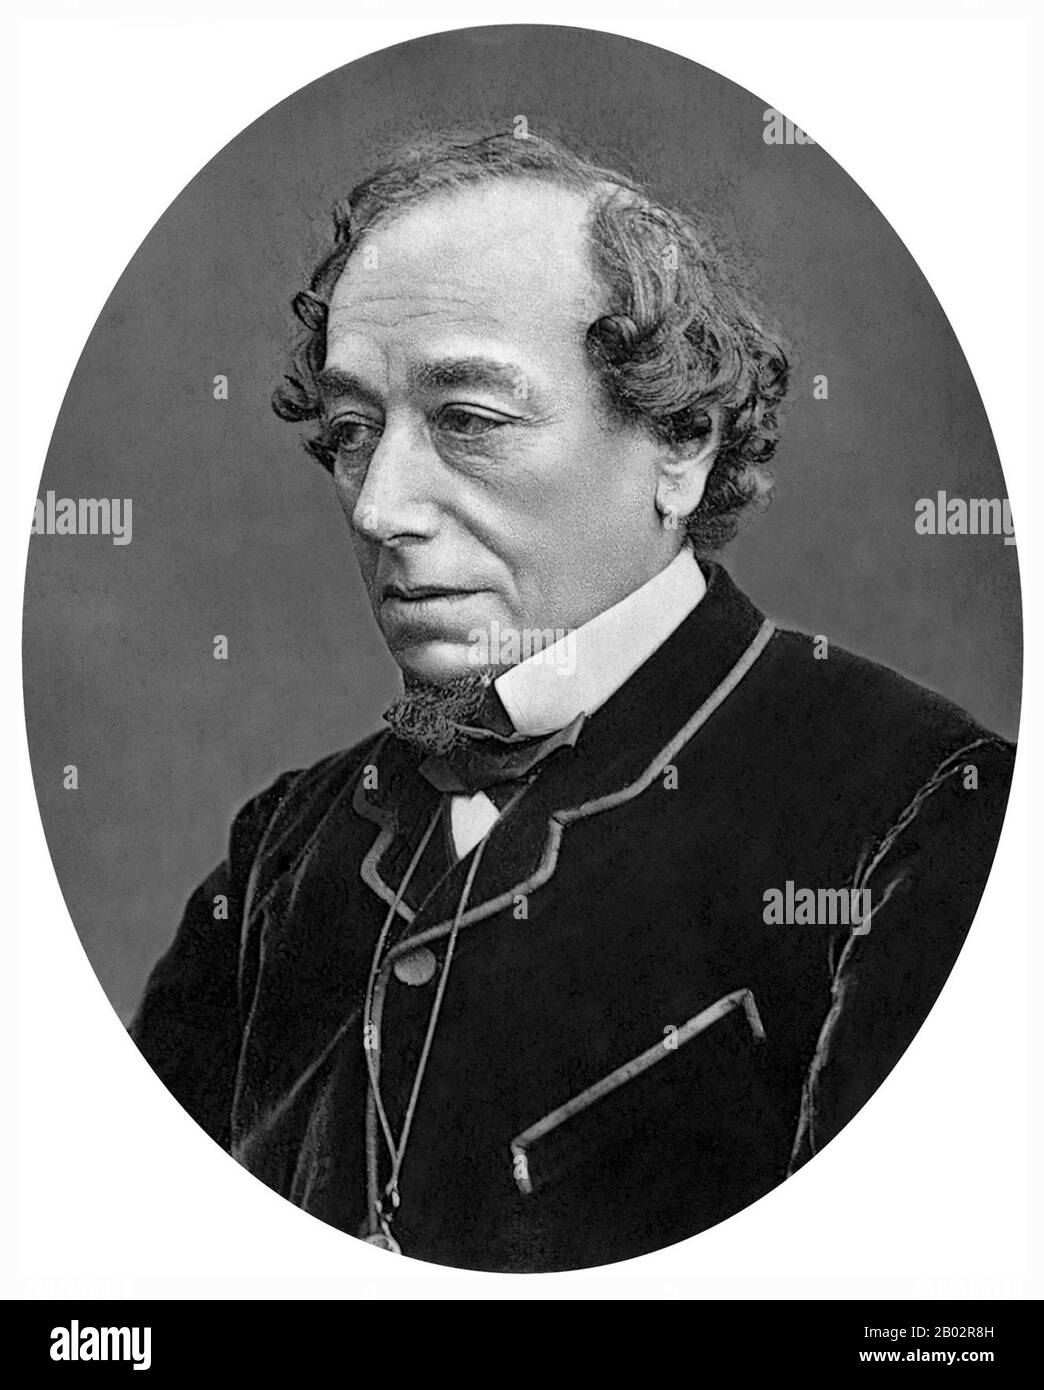 Benjamin Disraeli, 1st Earl of Beaconsfield, KG, PC, FRS, (21 December 1804 – 19 April 1881) was a British Conservative politician, writer and aristocrat who twice served as Prime Minister. He played a central role in the creation of the modern Conservative Party, defining its policies and its broad outreach.  Disraeli is remembered for his influential voice in world affairs, his political battles with the Liberal leader William Ewart Gladstone, and his one-nation conservatism or 'Tory democracy'. He made the Conservatives the party most identified with the glory and power of the British Empir Stock Photo